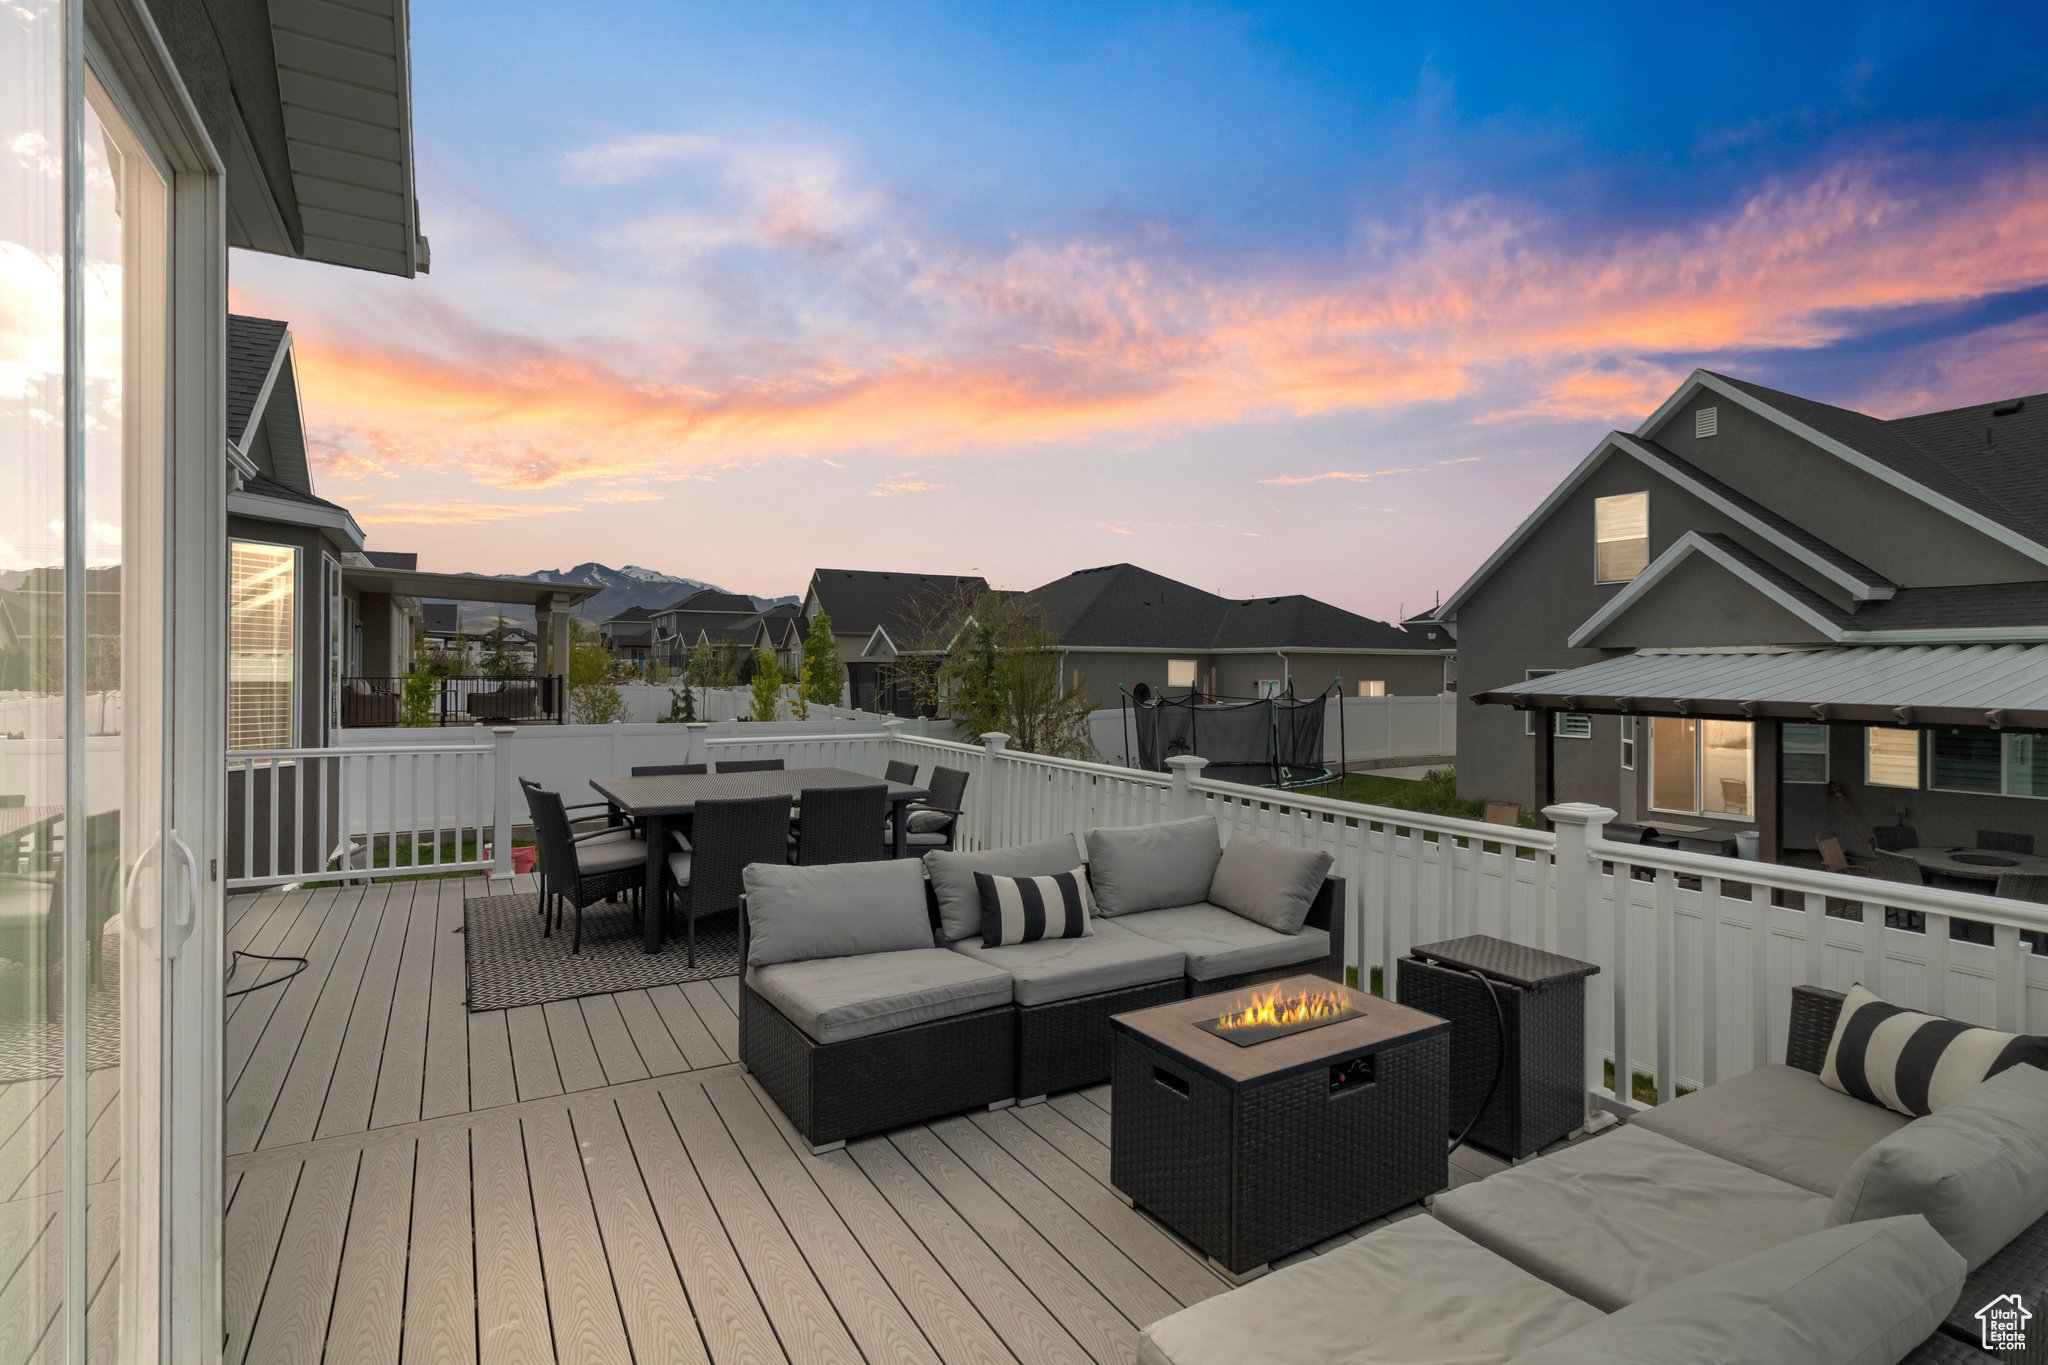 Deck at dusk with an outdoor living spacE